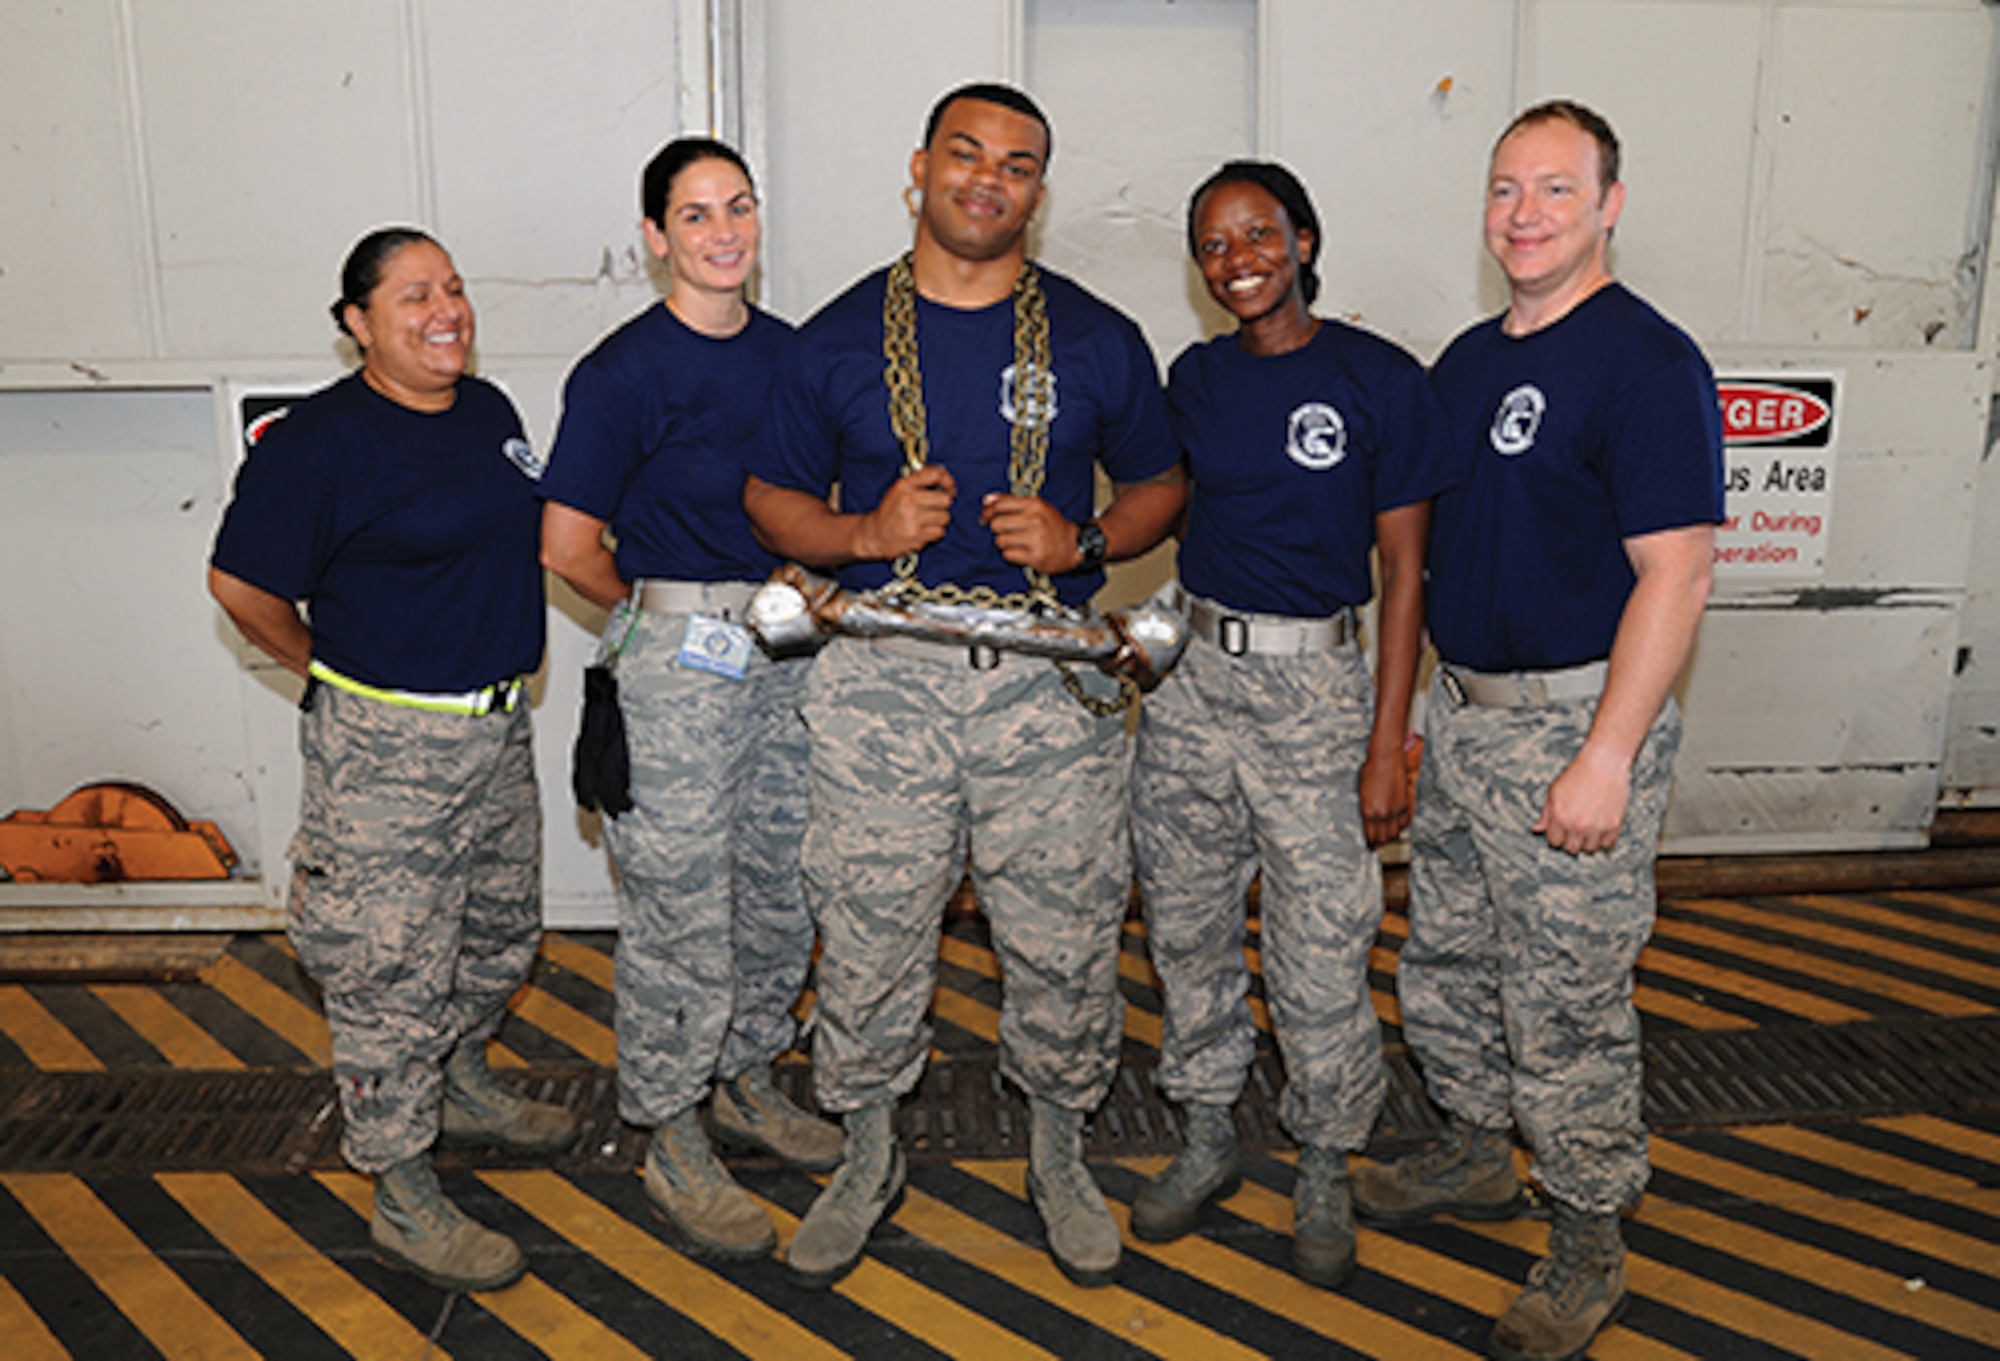 Six Airmen from the 908th Airlift Wing’s 25th Aerial Port Squadron recently competed against 25 teams in Air Force Reserve Command’s Port Dawg Challenge at Dobbins Air Reserve Base, Ga. Pictured are, from left, Tech. Sgts. Leslie Jordan and Veronica Natal, Senior Airman Rickney Hunter, Airman First Class Alexandra Moton and Master Sgt. Frederick Koehl. Not pictured is Tech. Sgt. Jason Martin.